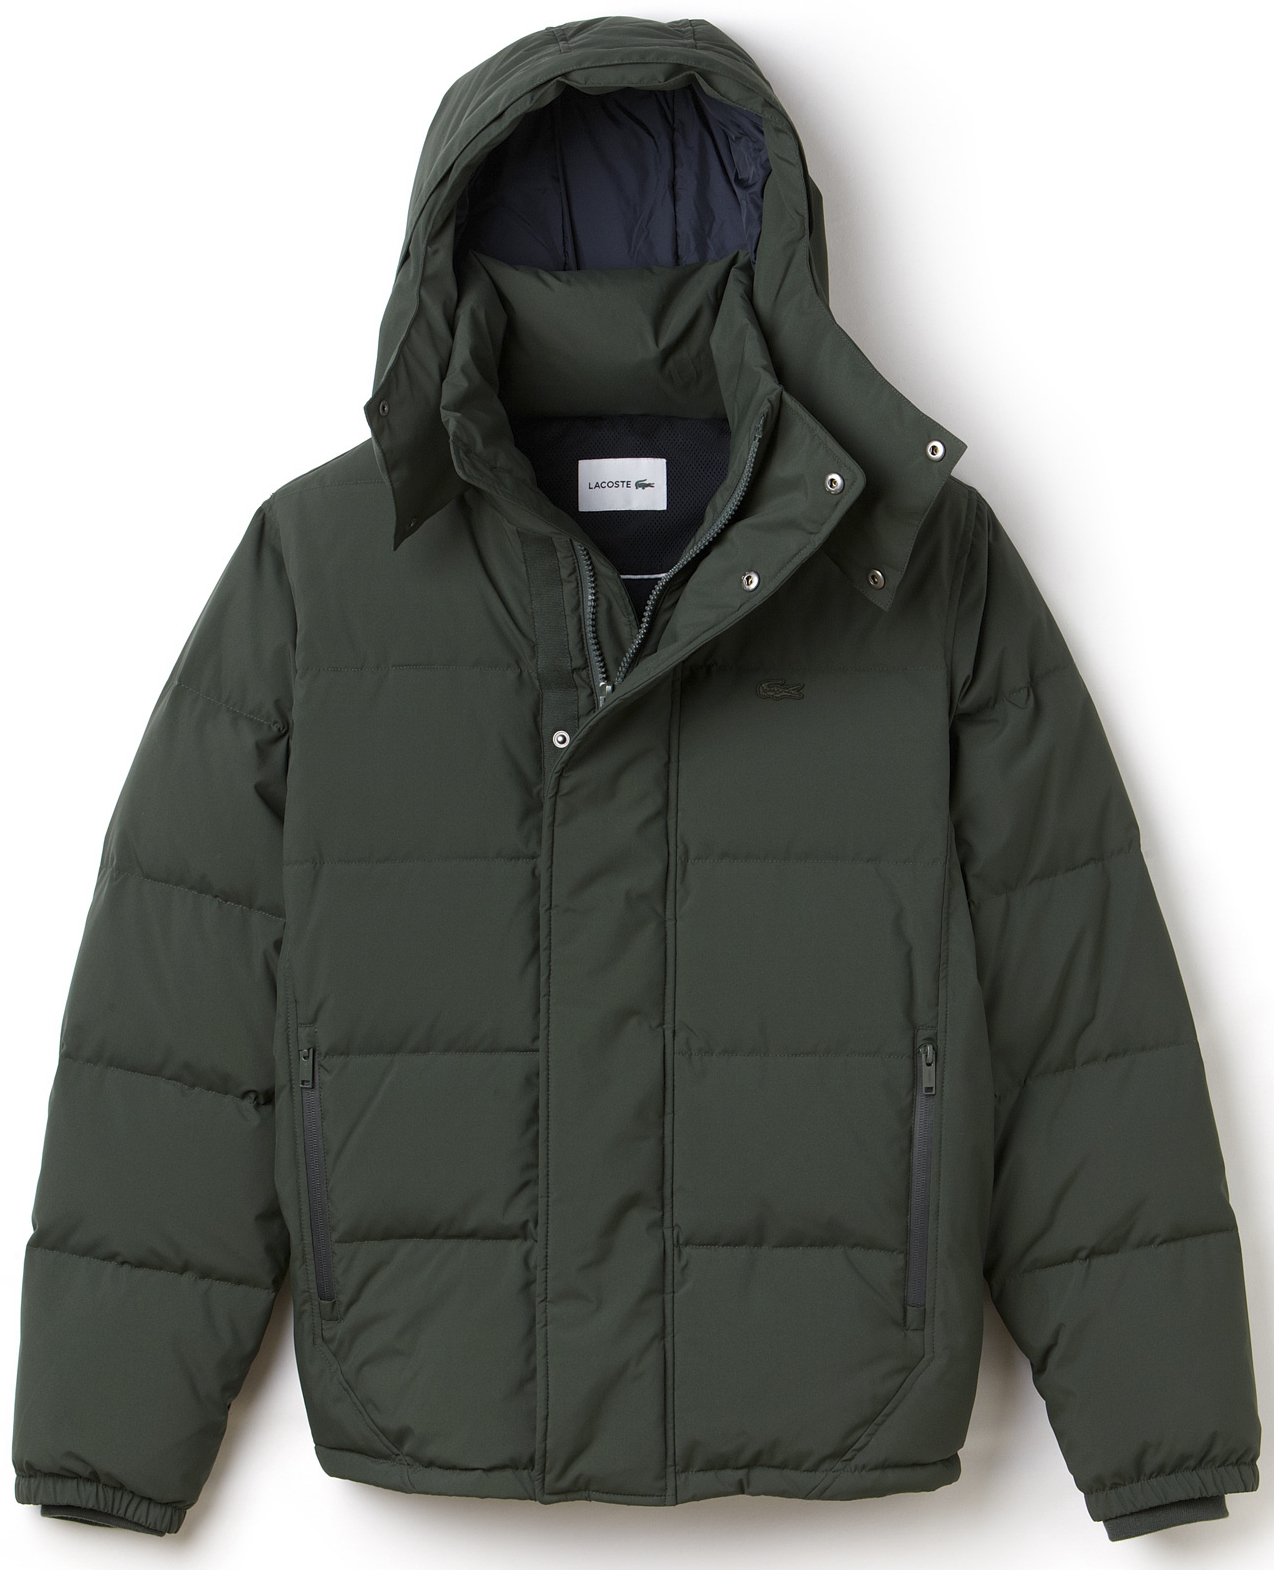 Lacoste Winter Weight Down Jacket, $395